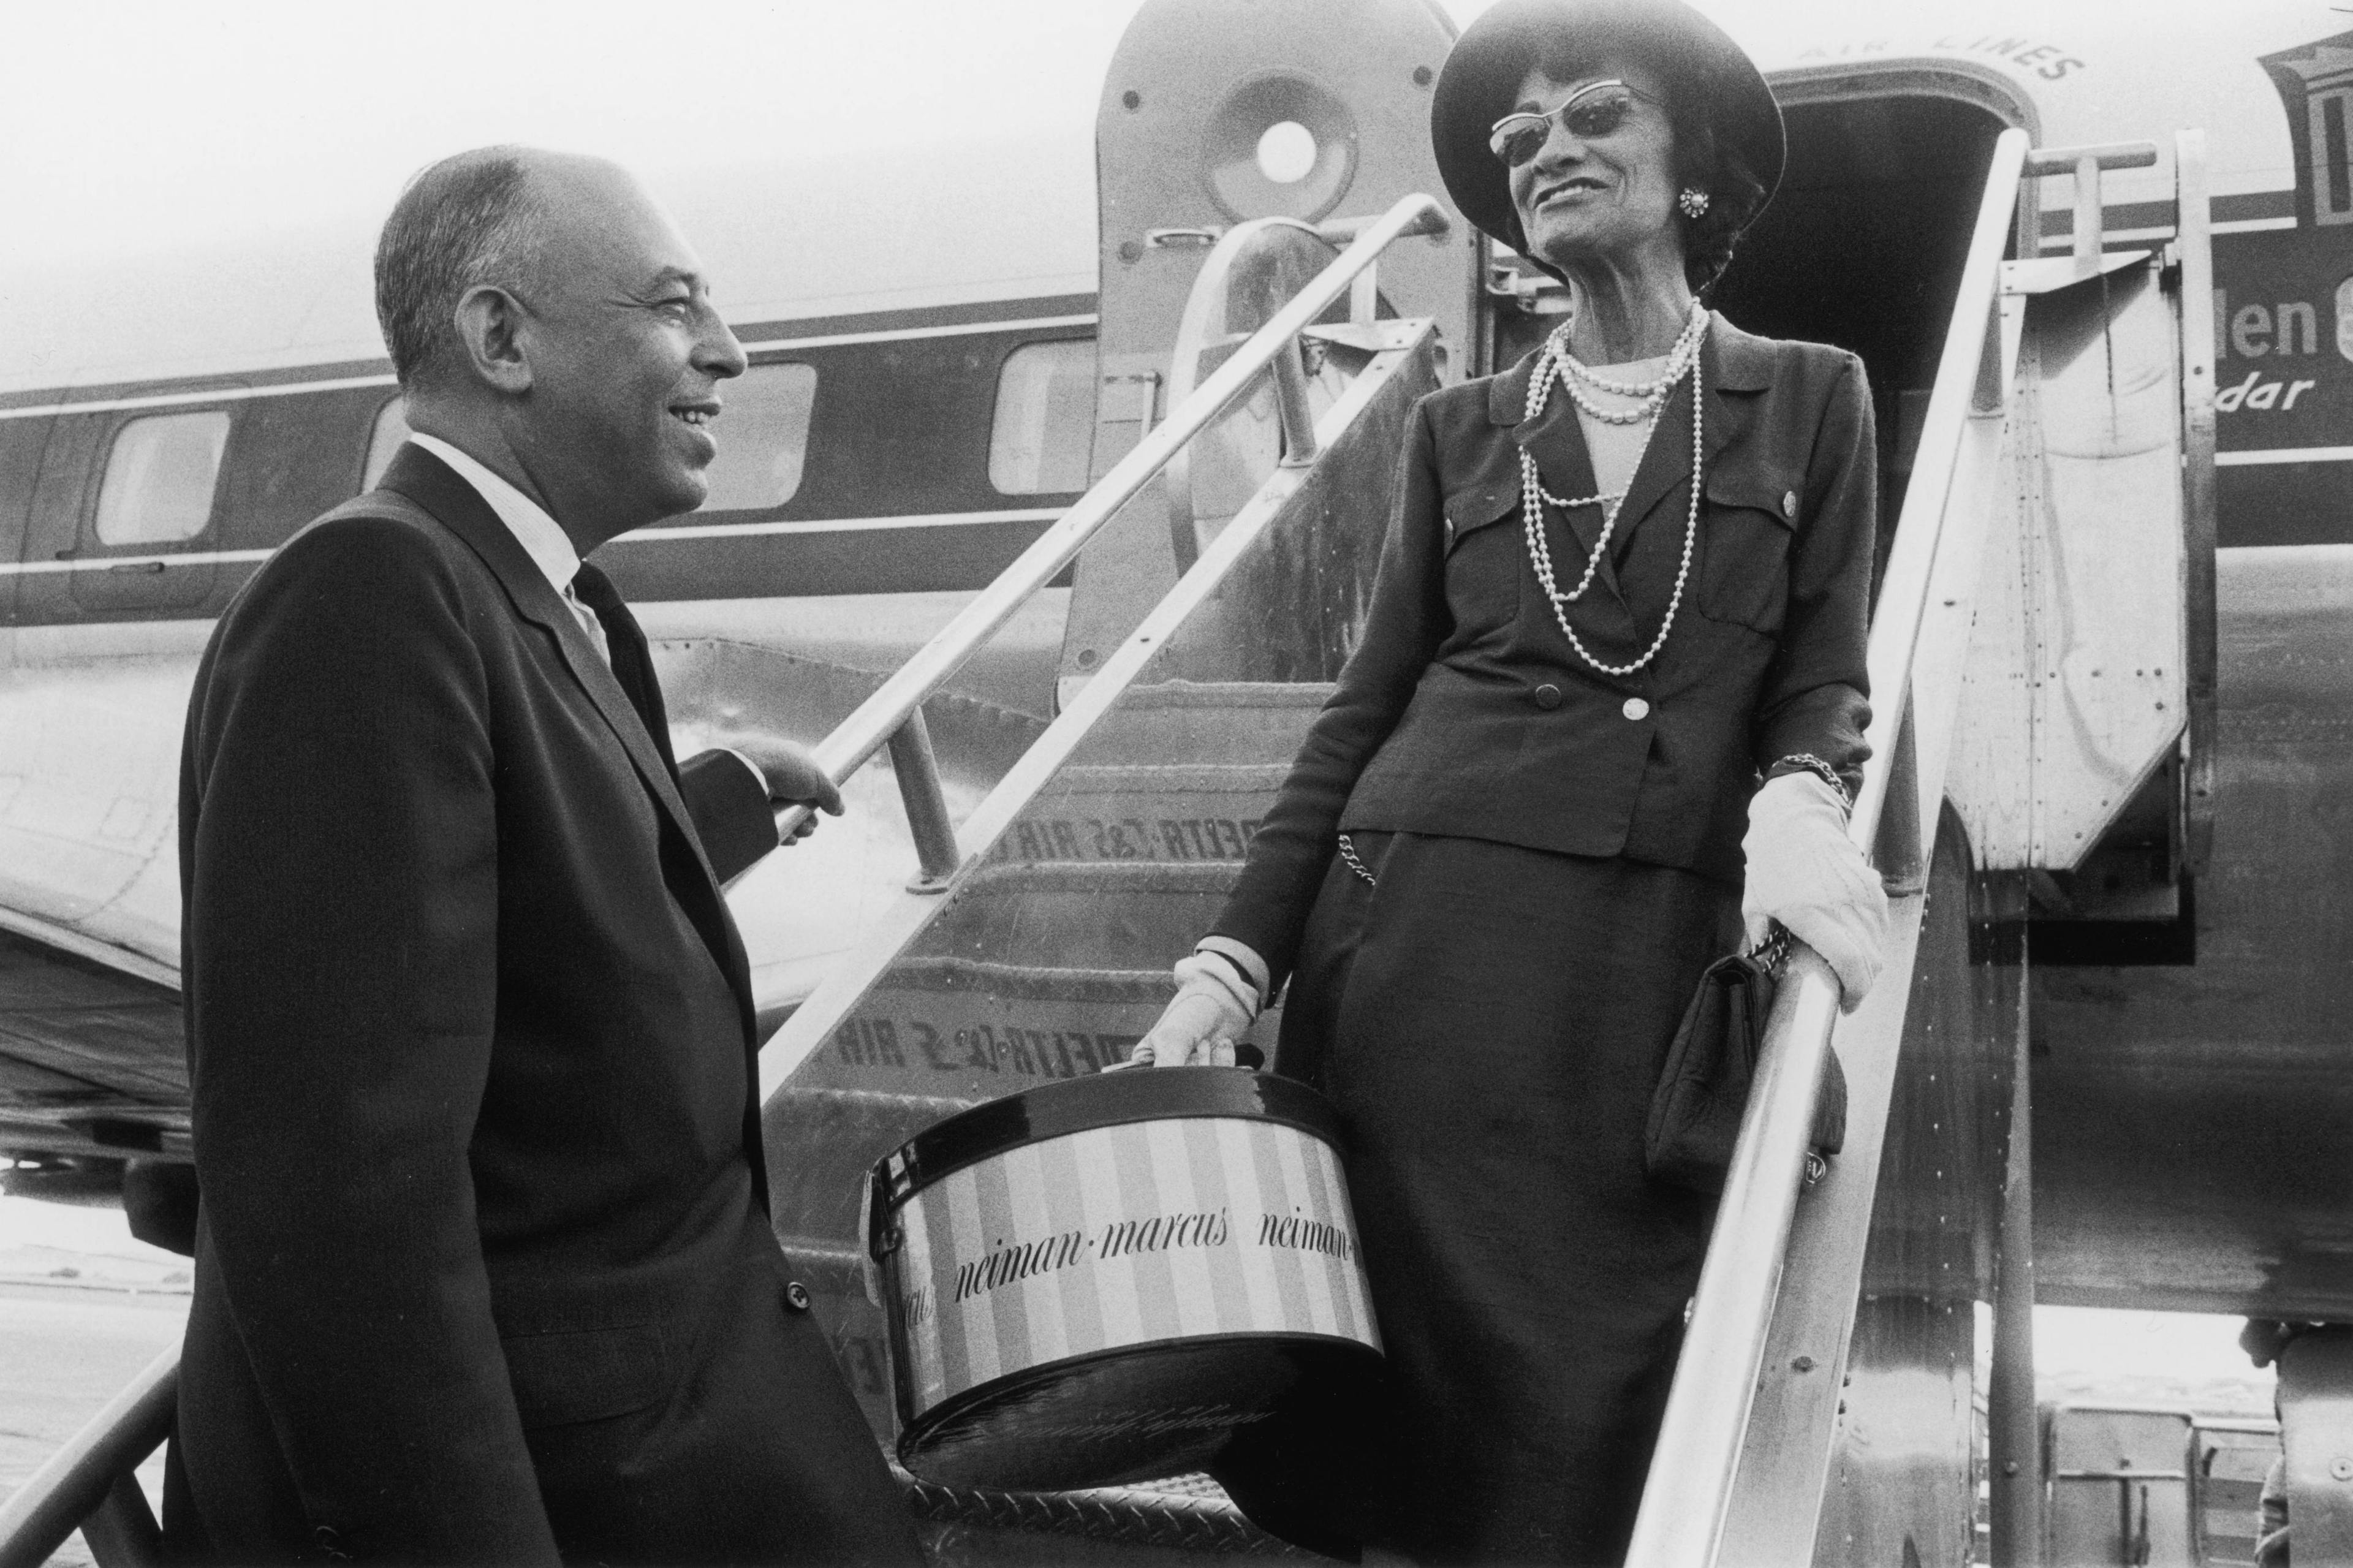 Chanel family brand history; Coco Chanel boarding a plane after the opening of a new Neiman-Marcus store.